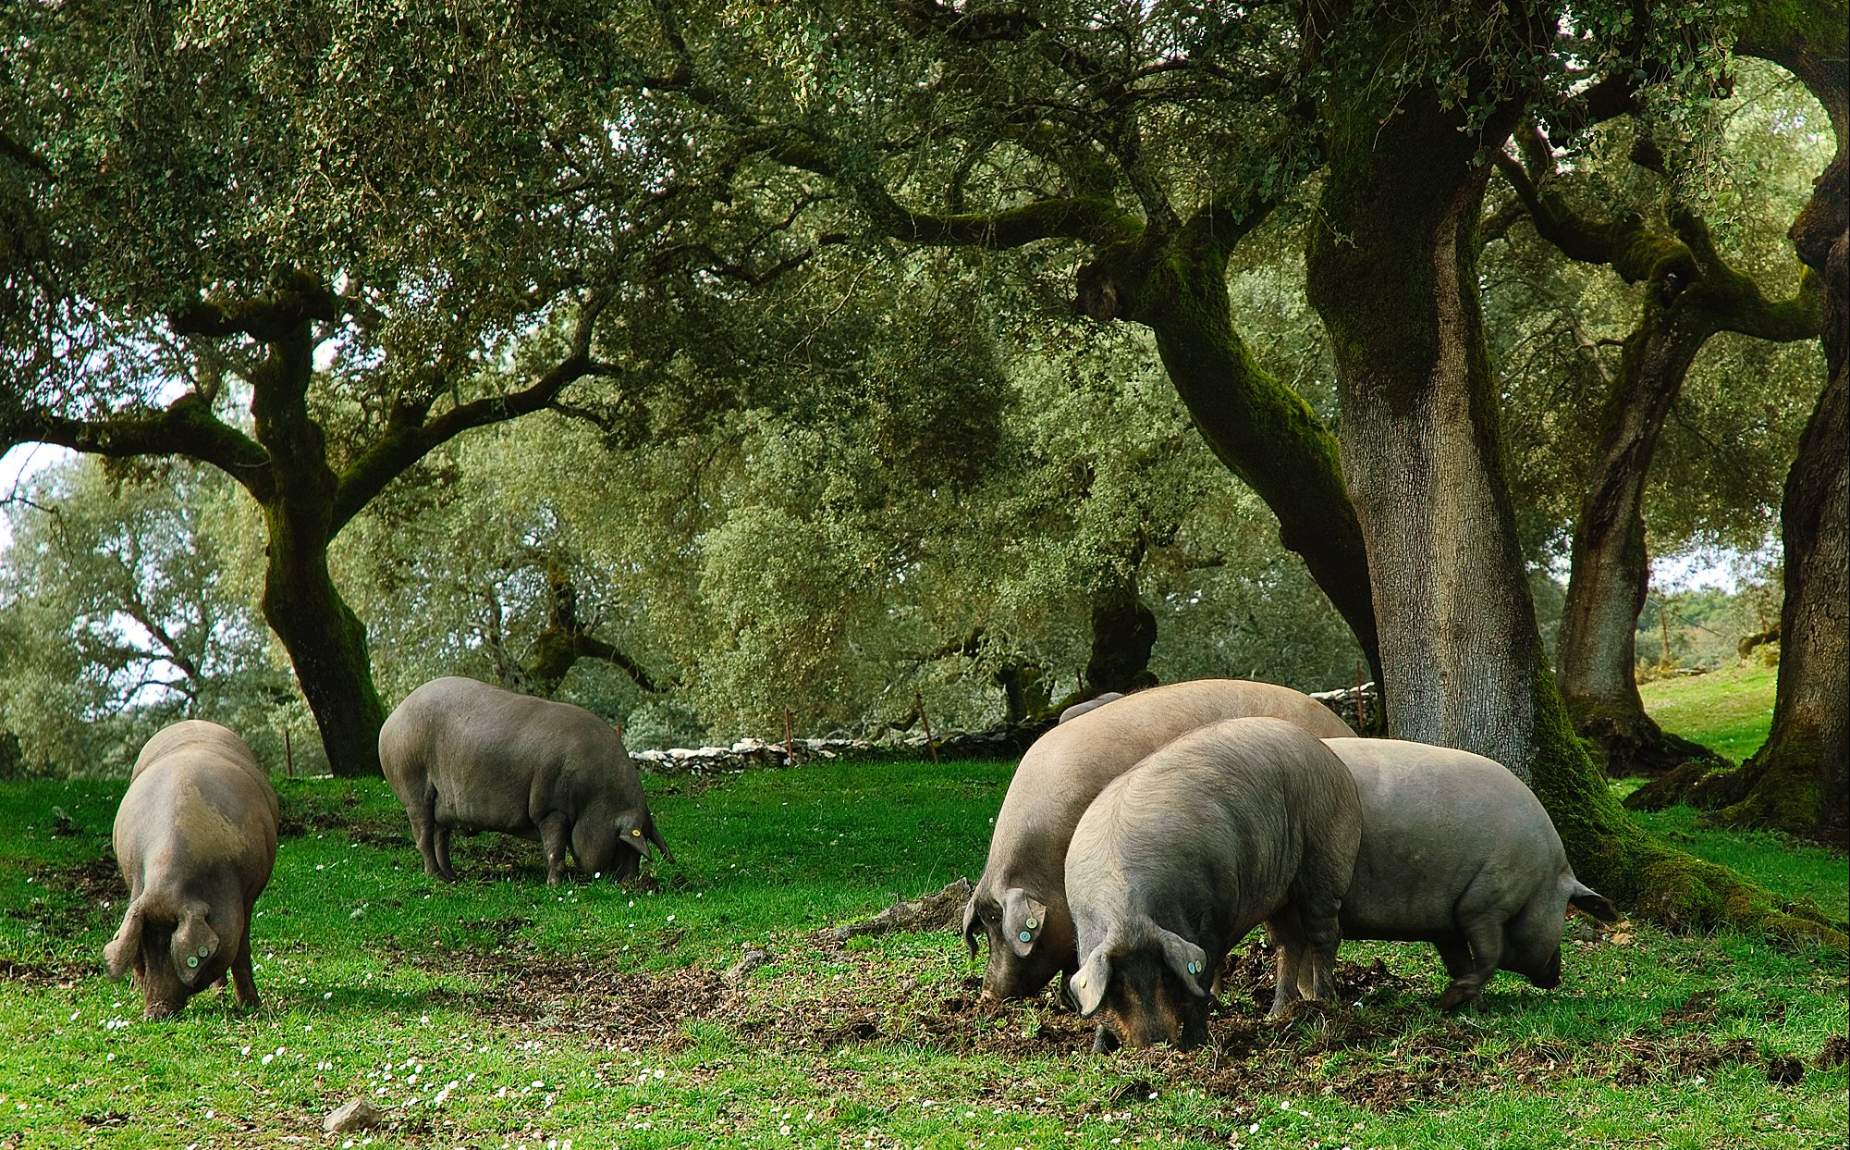 pigs eating among trees